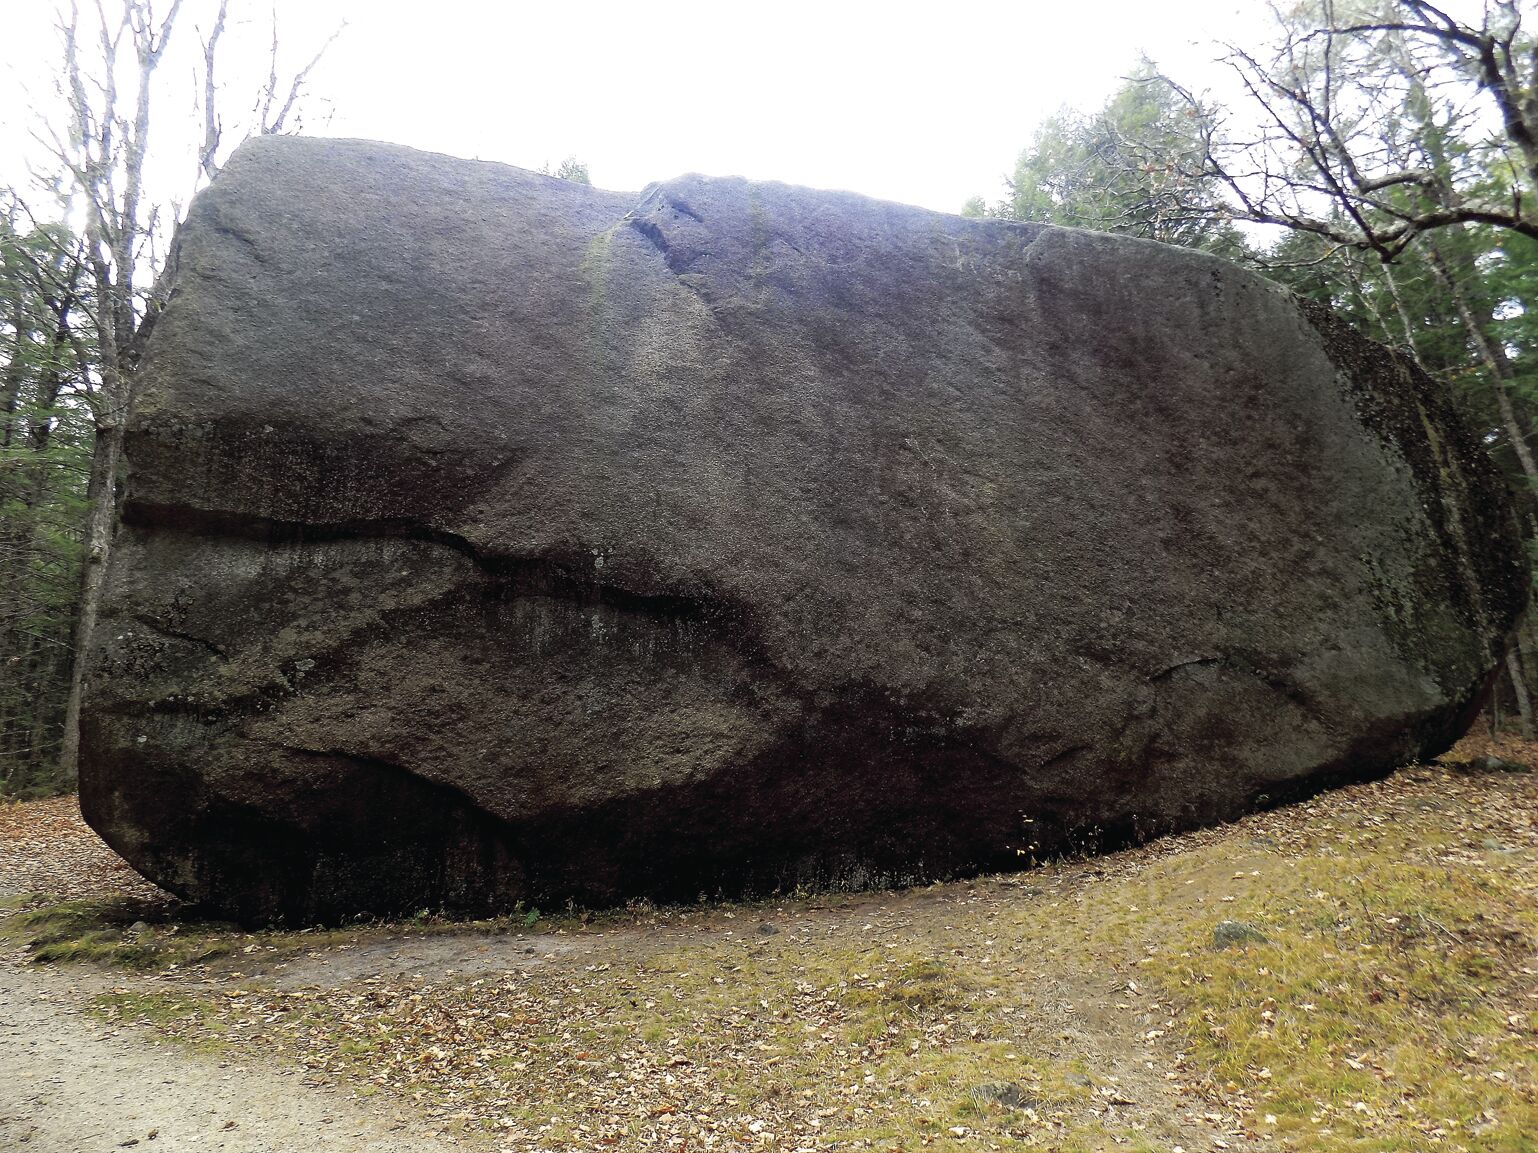 Madison Boulder is more than just a big rock | Hiking News